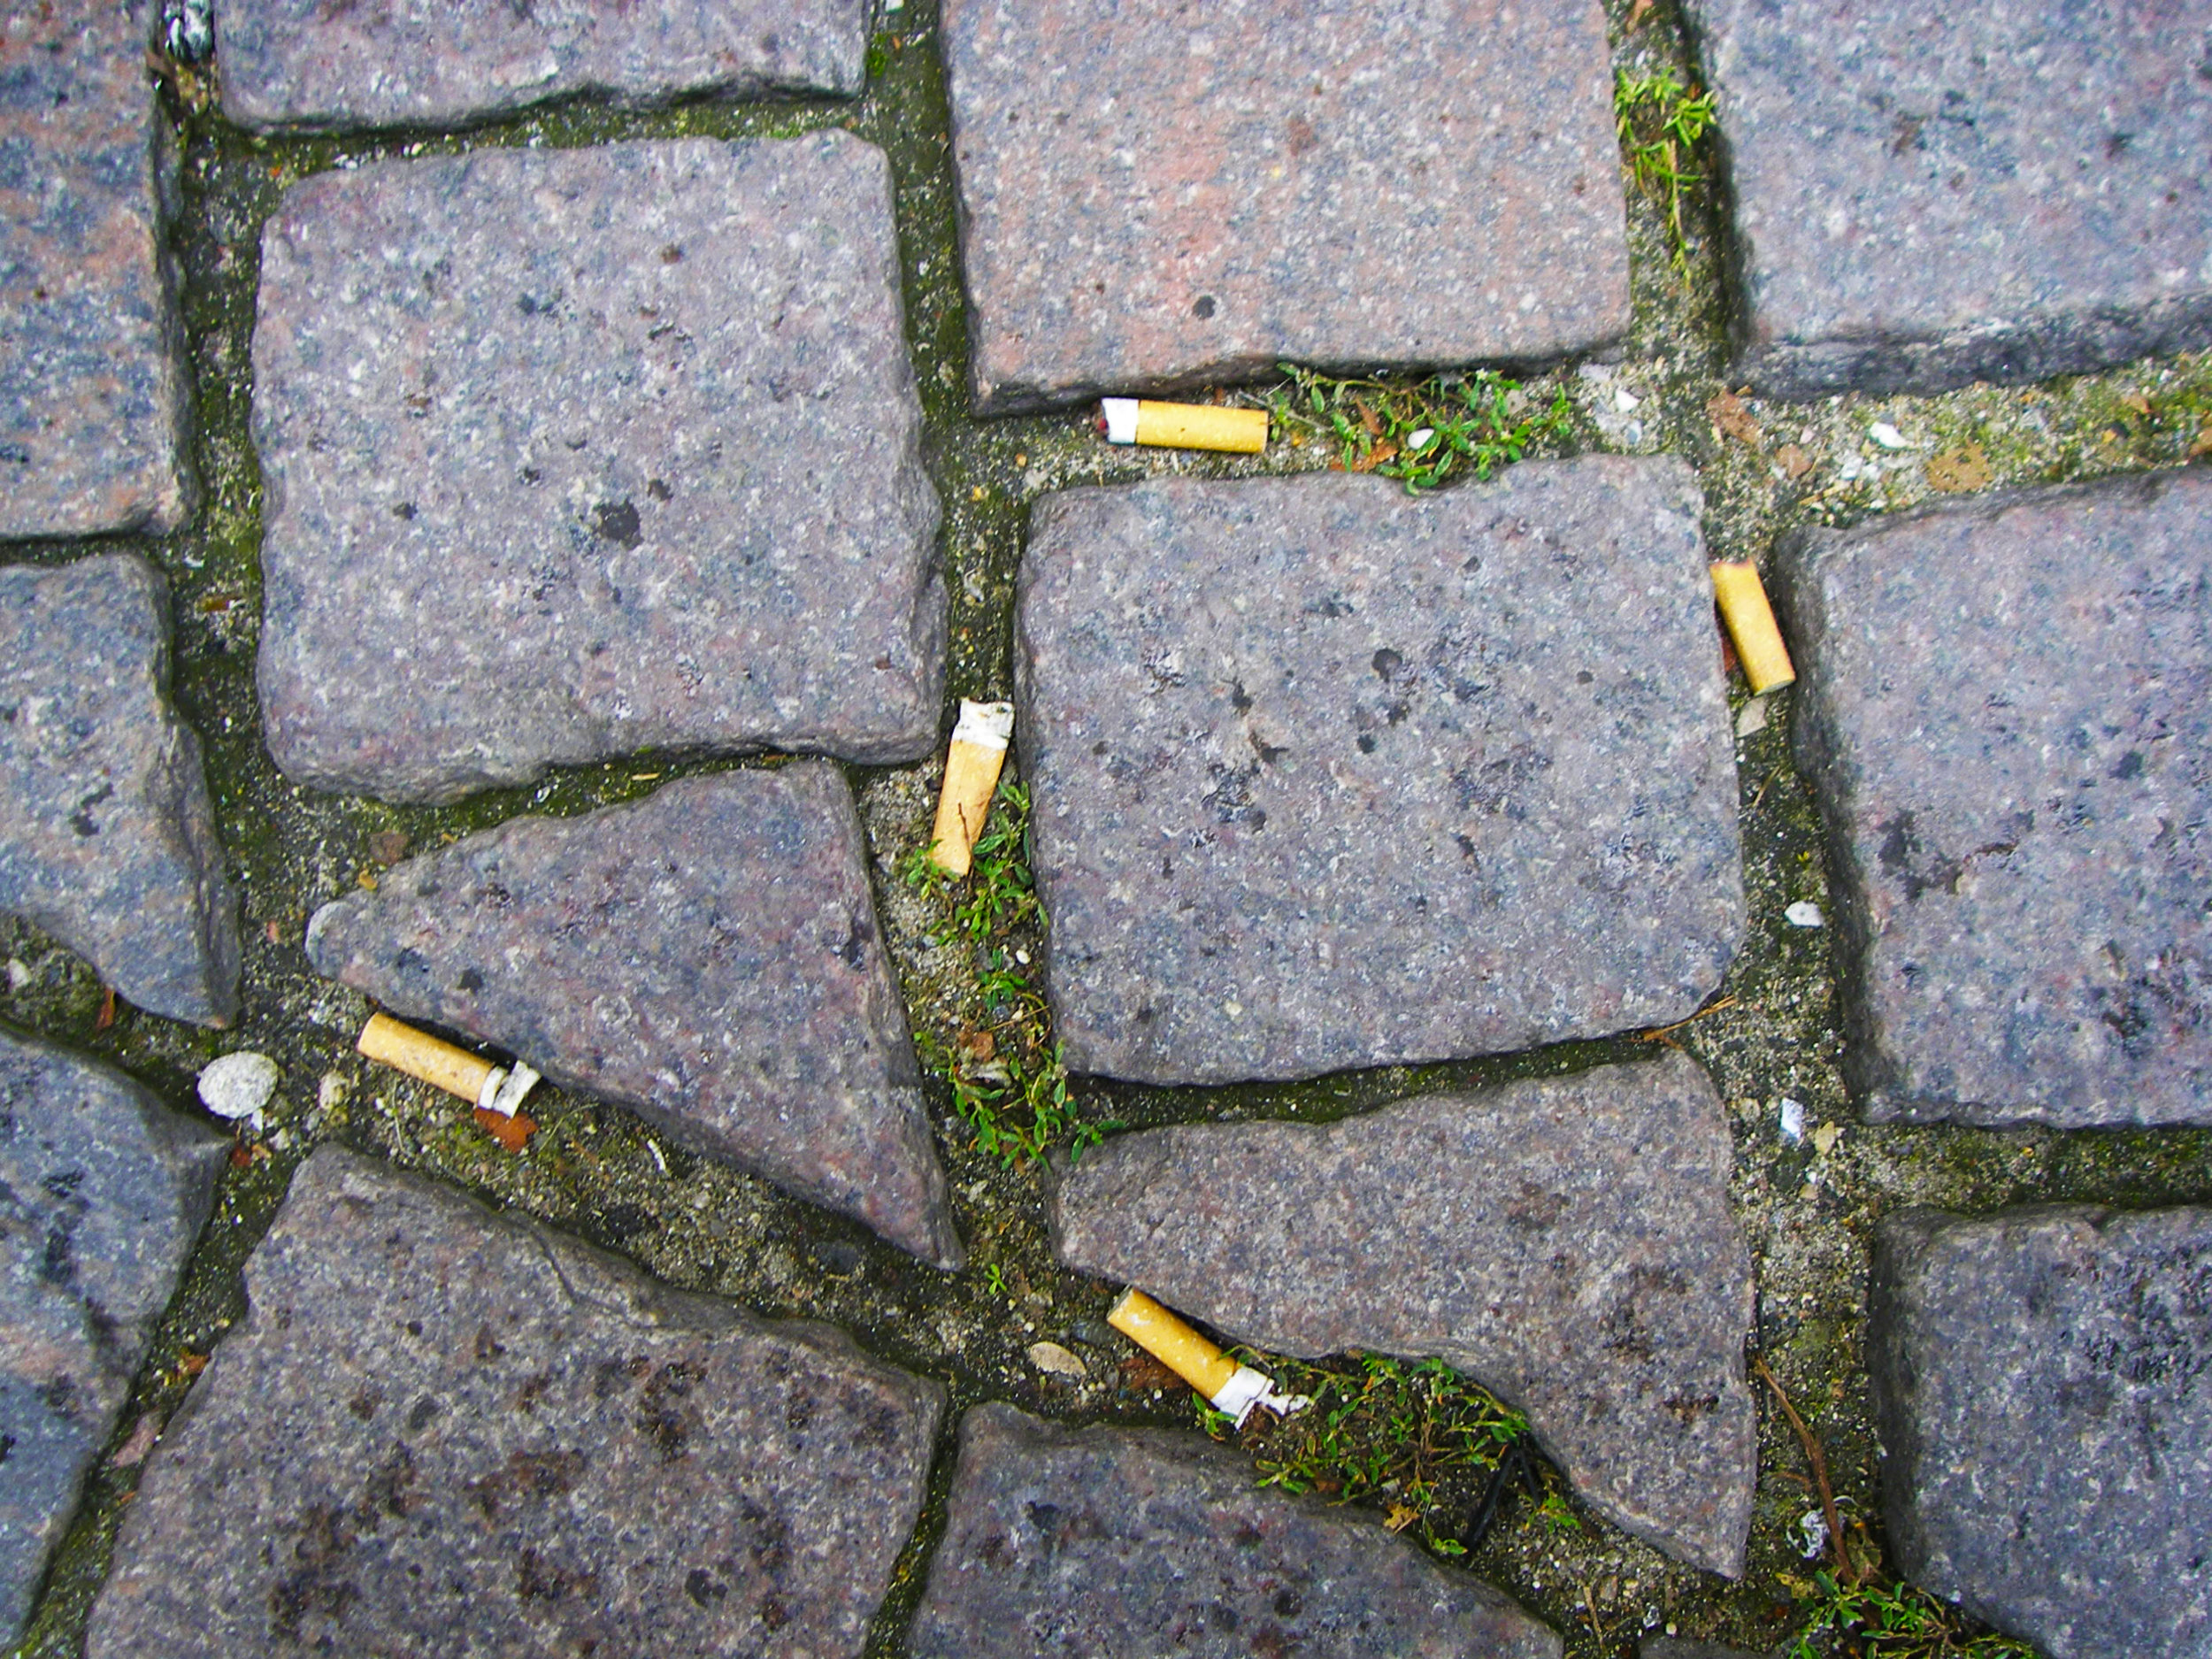 Cigarette buts are all over and difficult to pick up